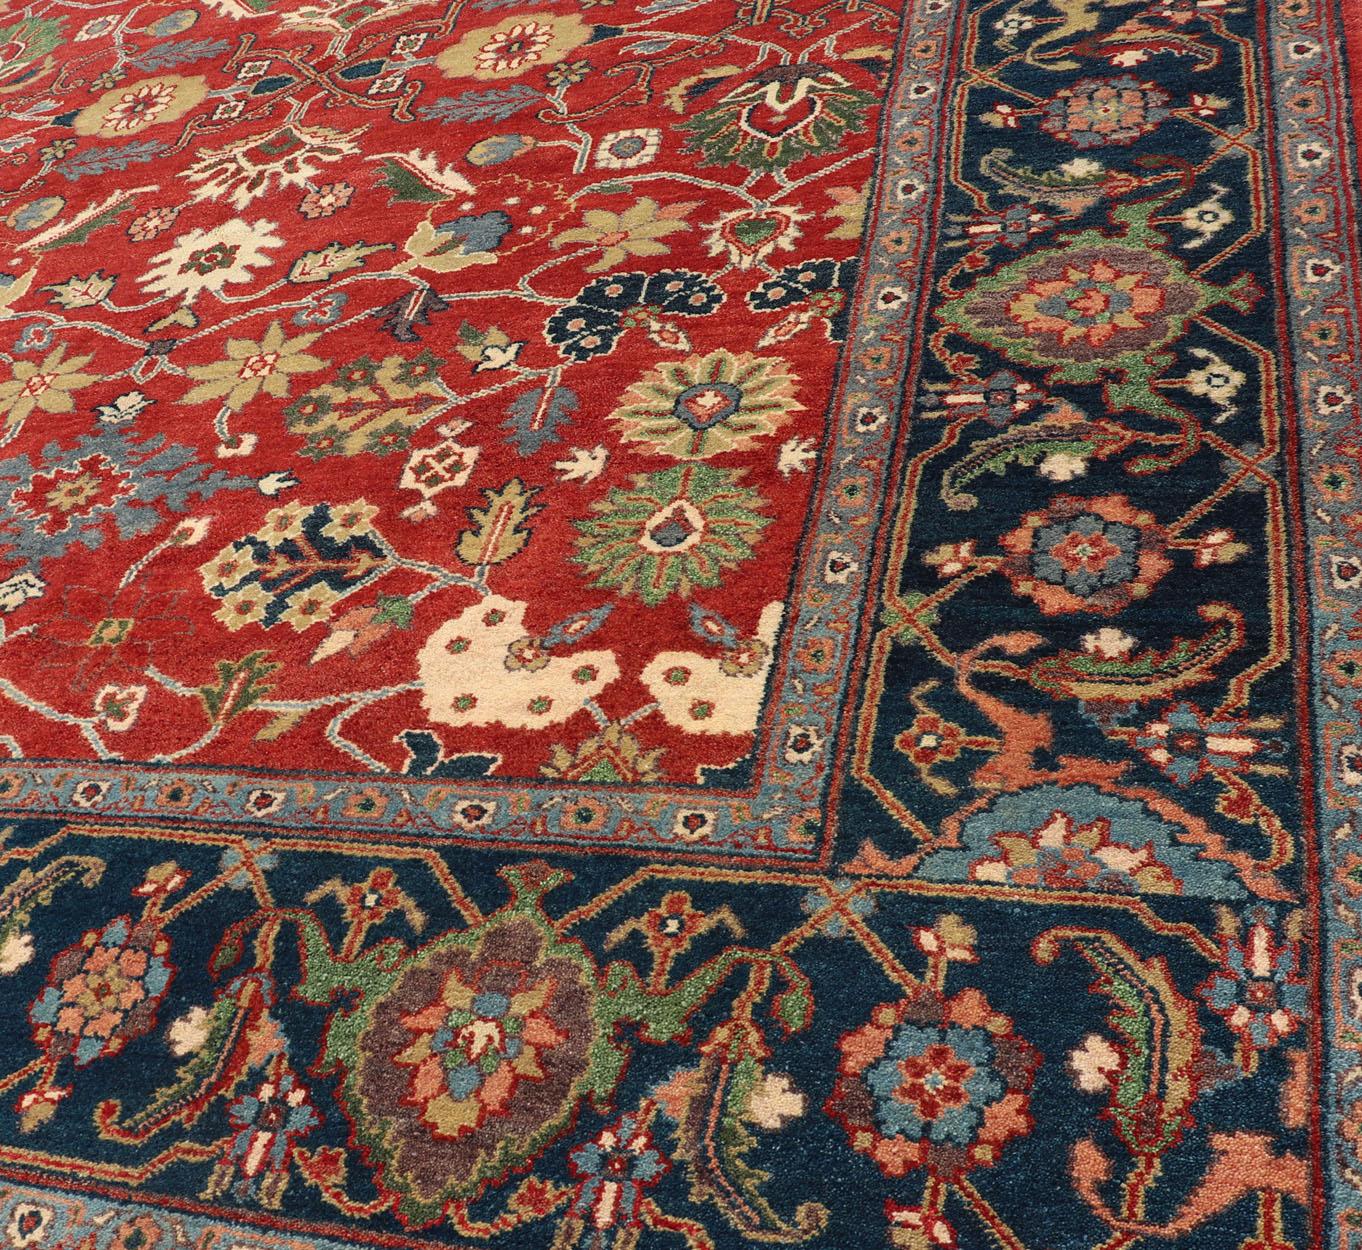 Reproduction Sultanabad-Mahal All-over Floral Hand-Knotted Carpet  5